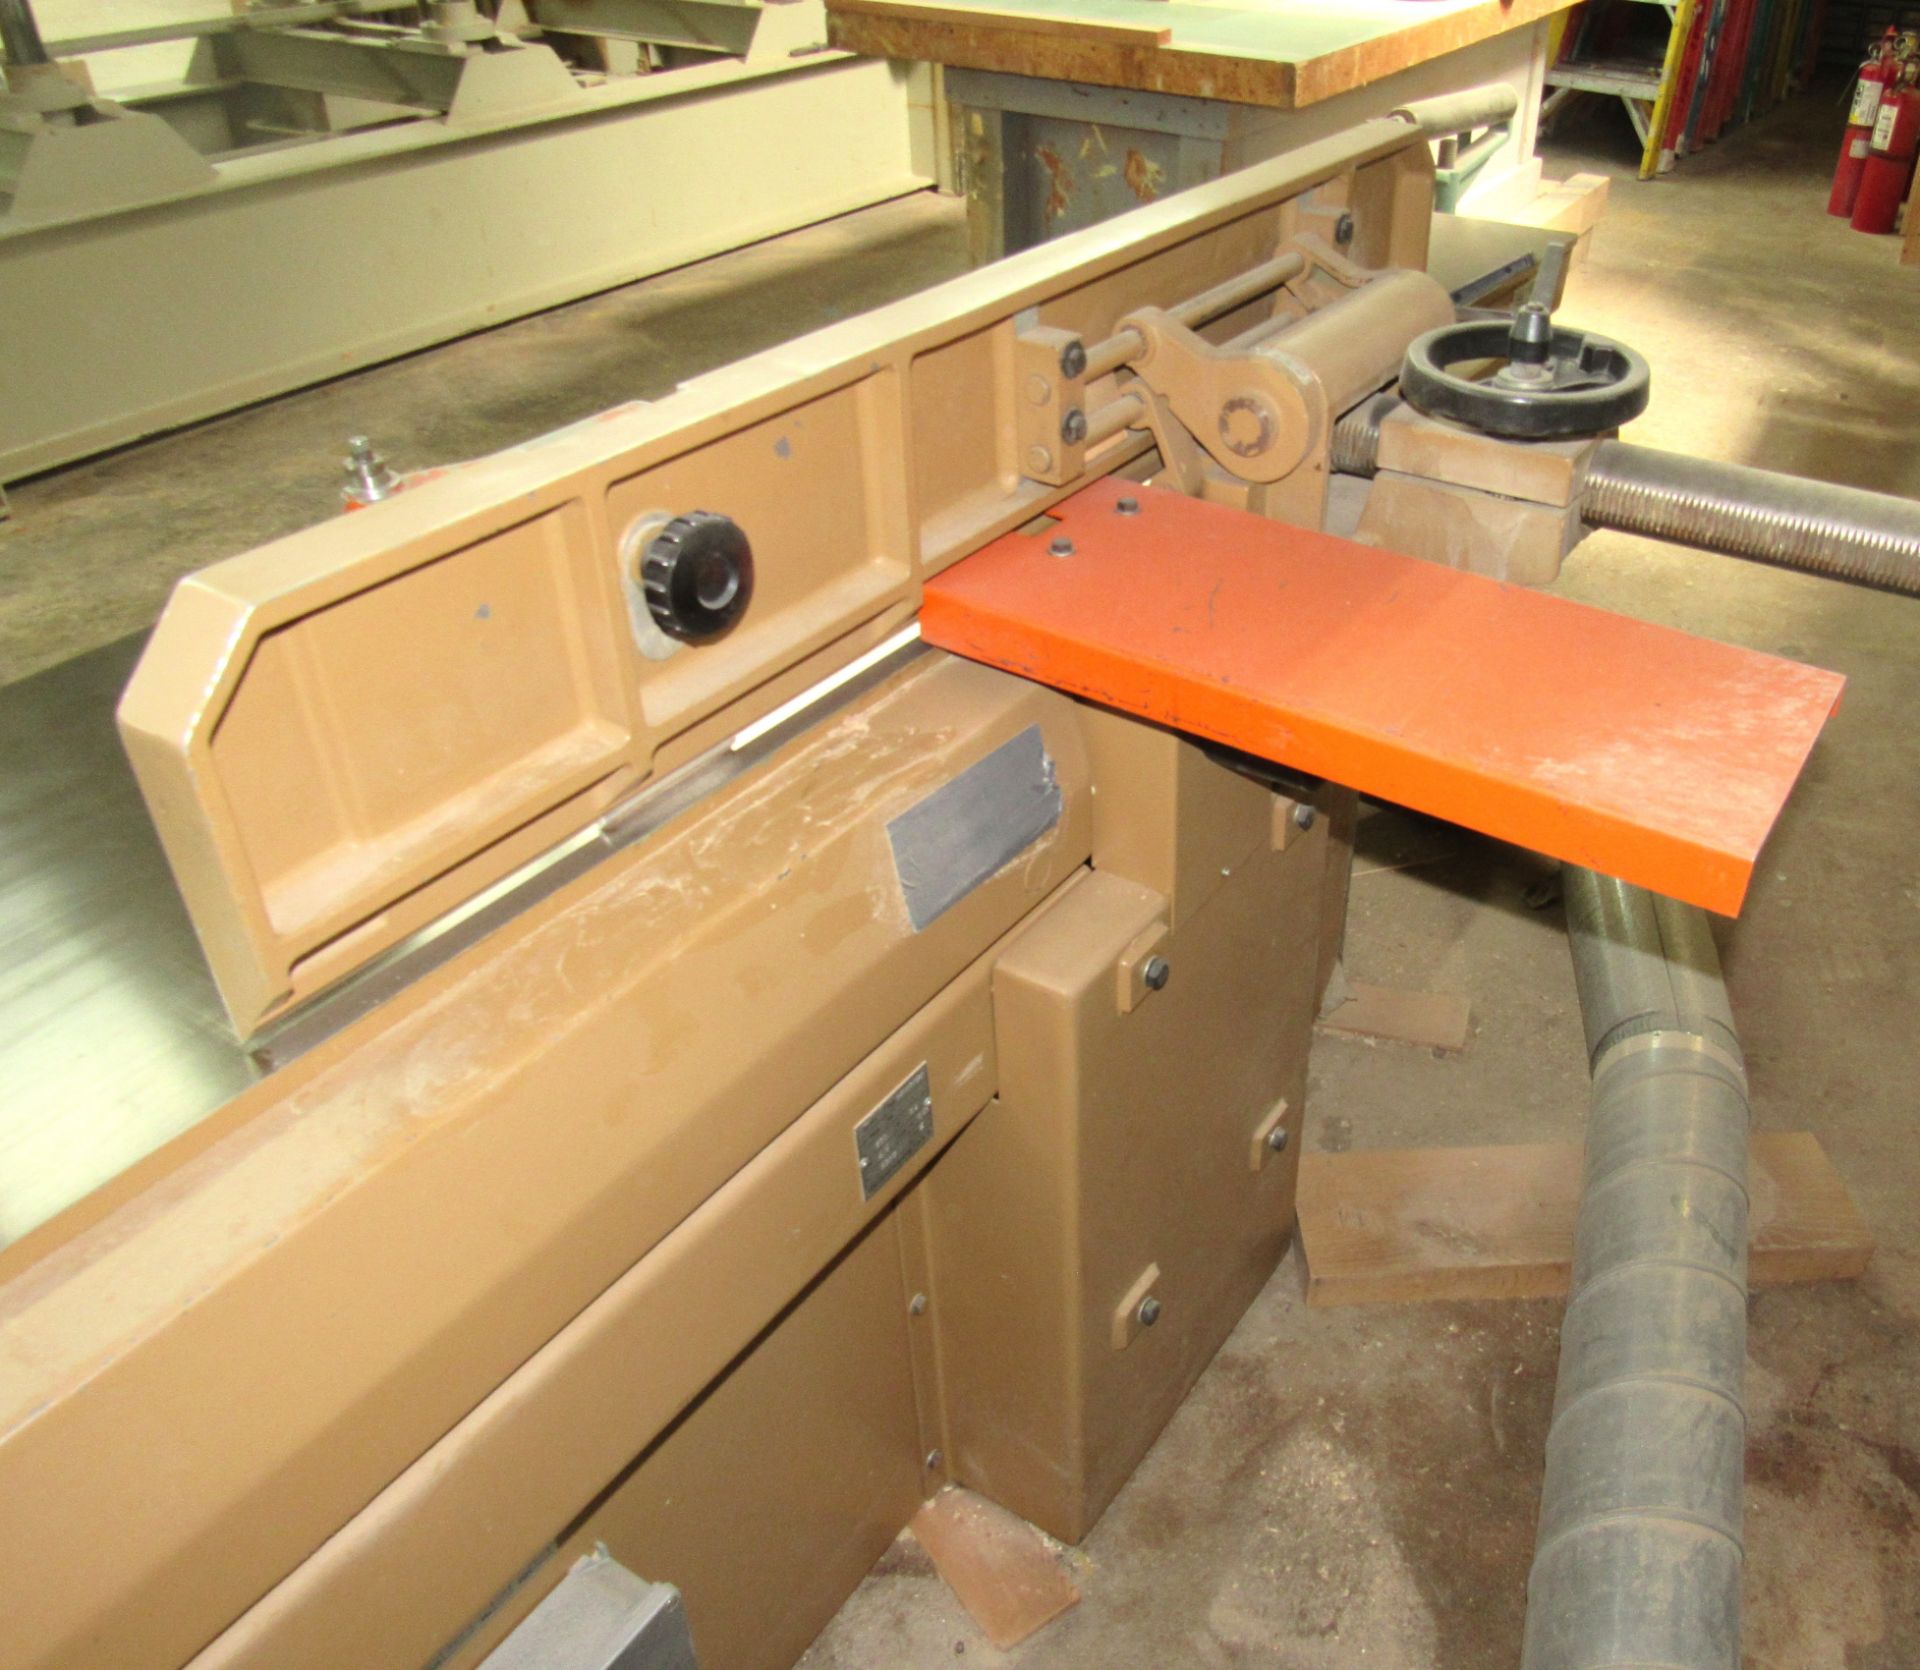 Sicma Mod.DT430 17" Wood Jointer - S/N 4030989, 98" Table Length, 7.5HP, 220/3/60 - Image 4 of 5